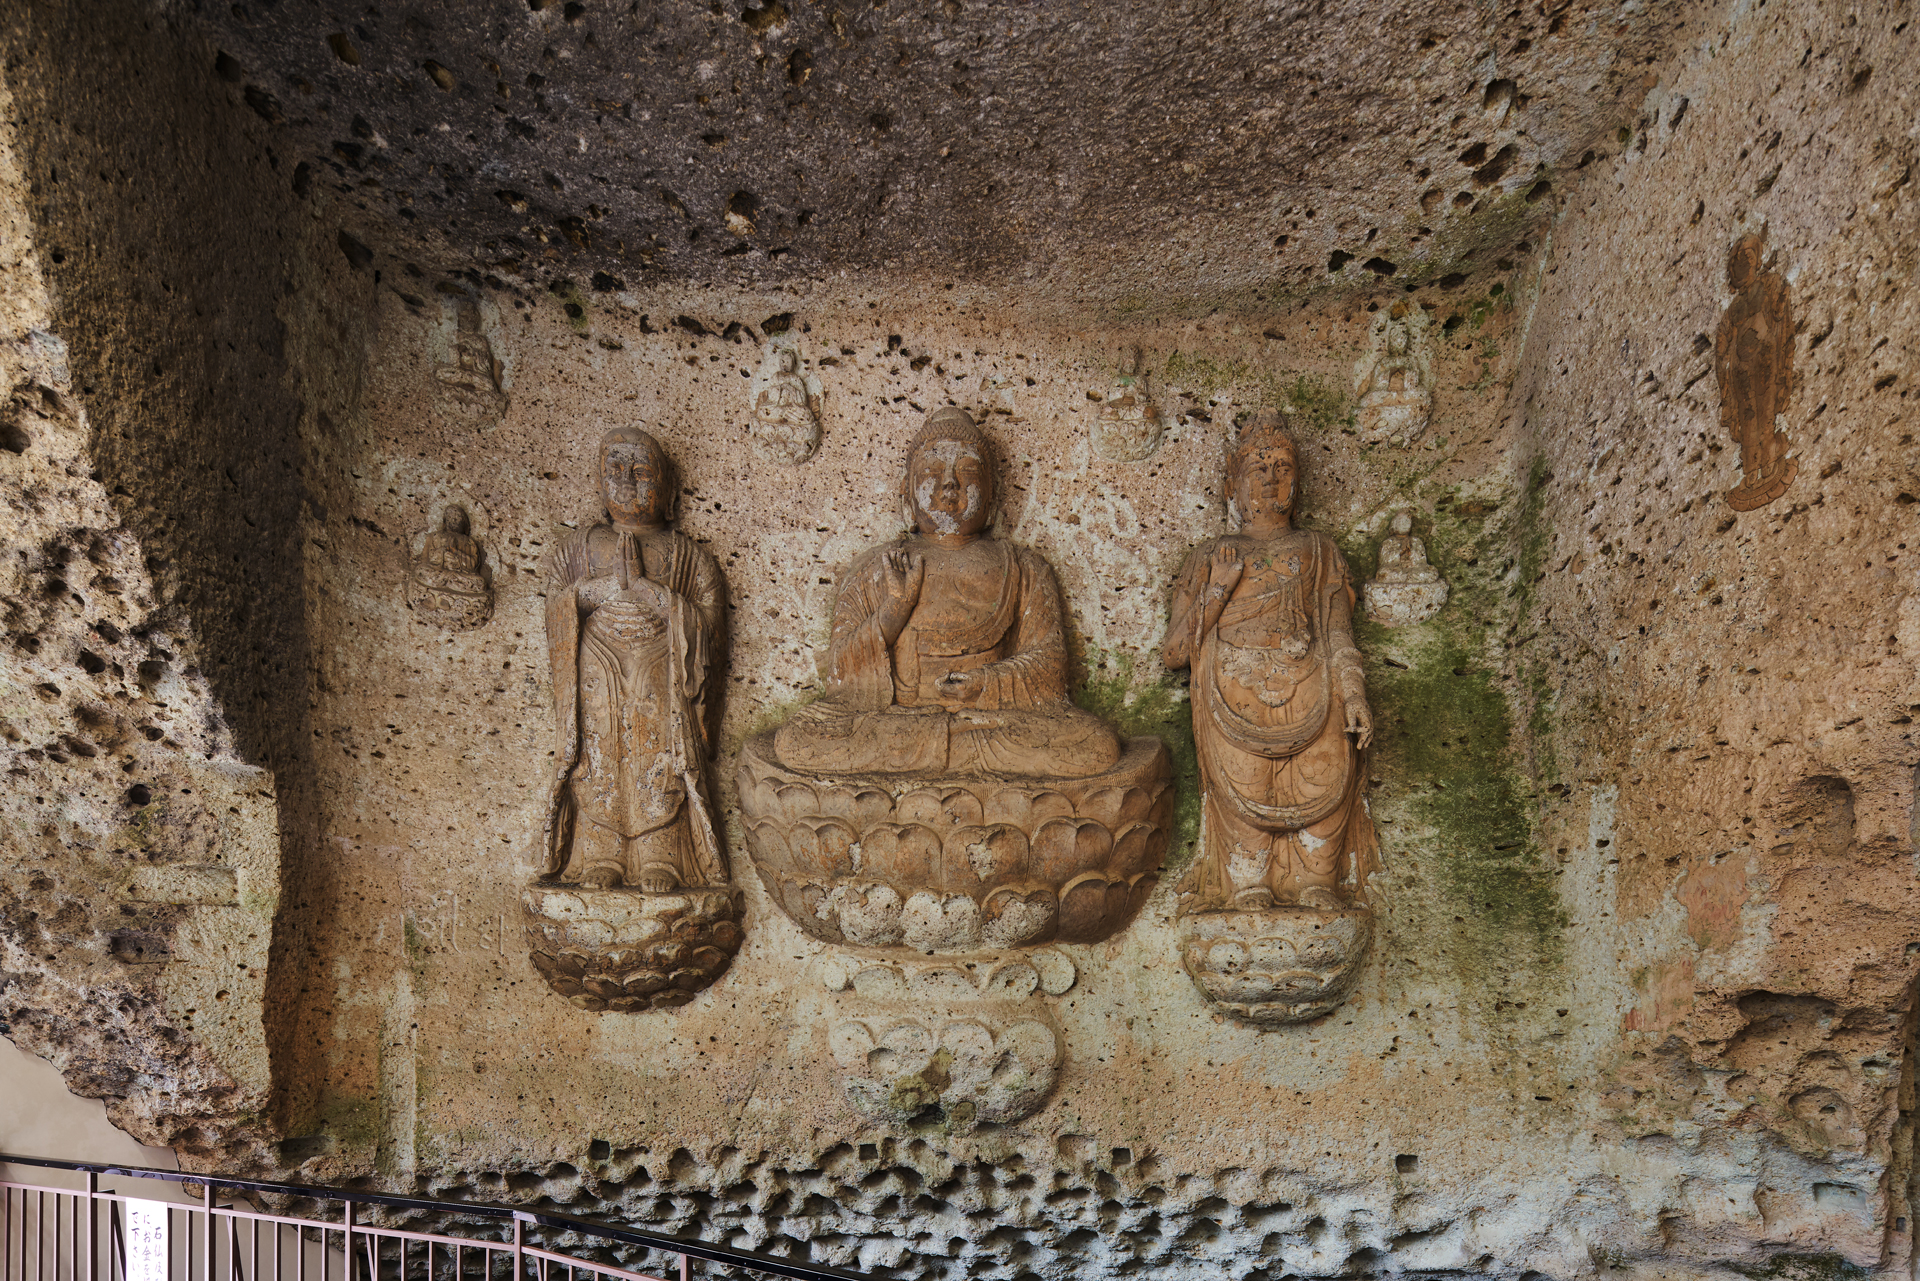 Oya Magaibutsu (carved Buddha images on a rock face)